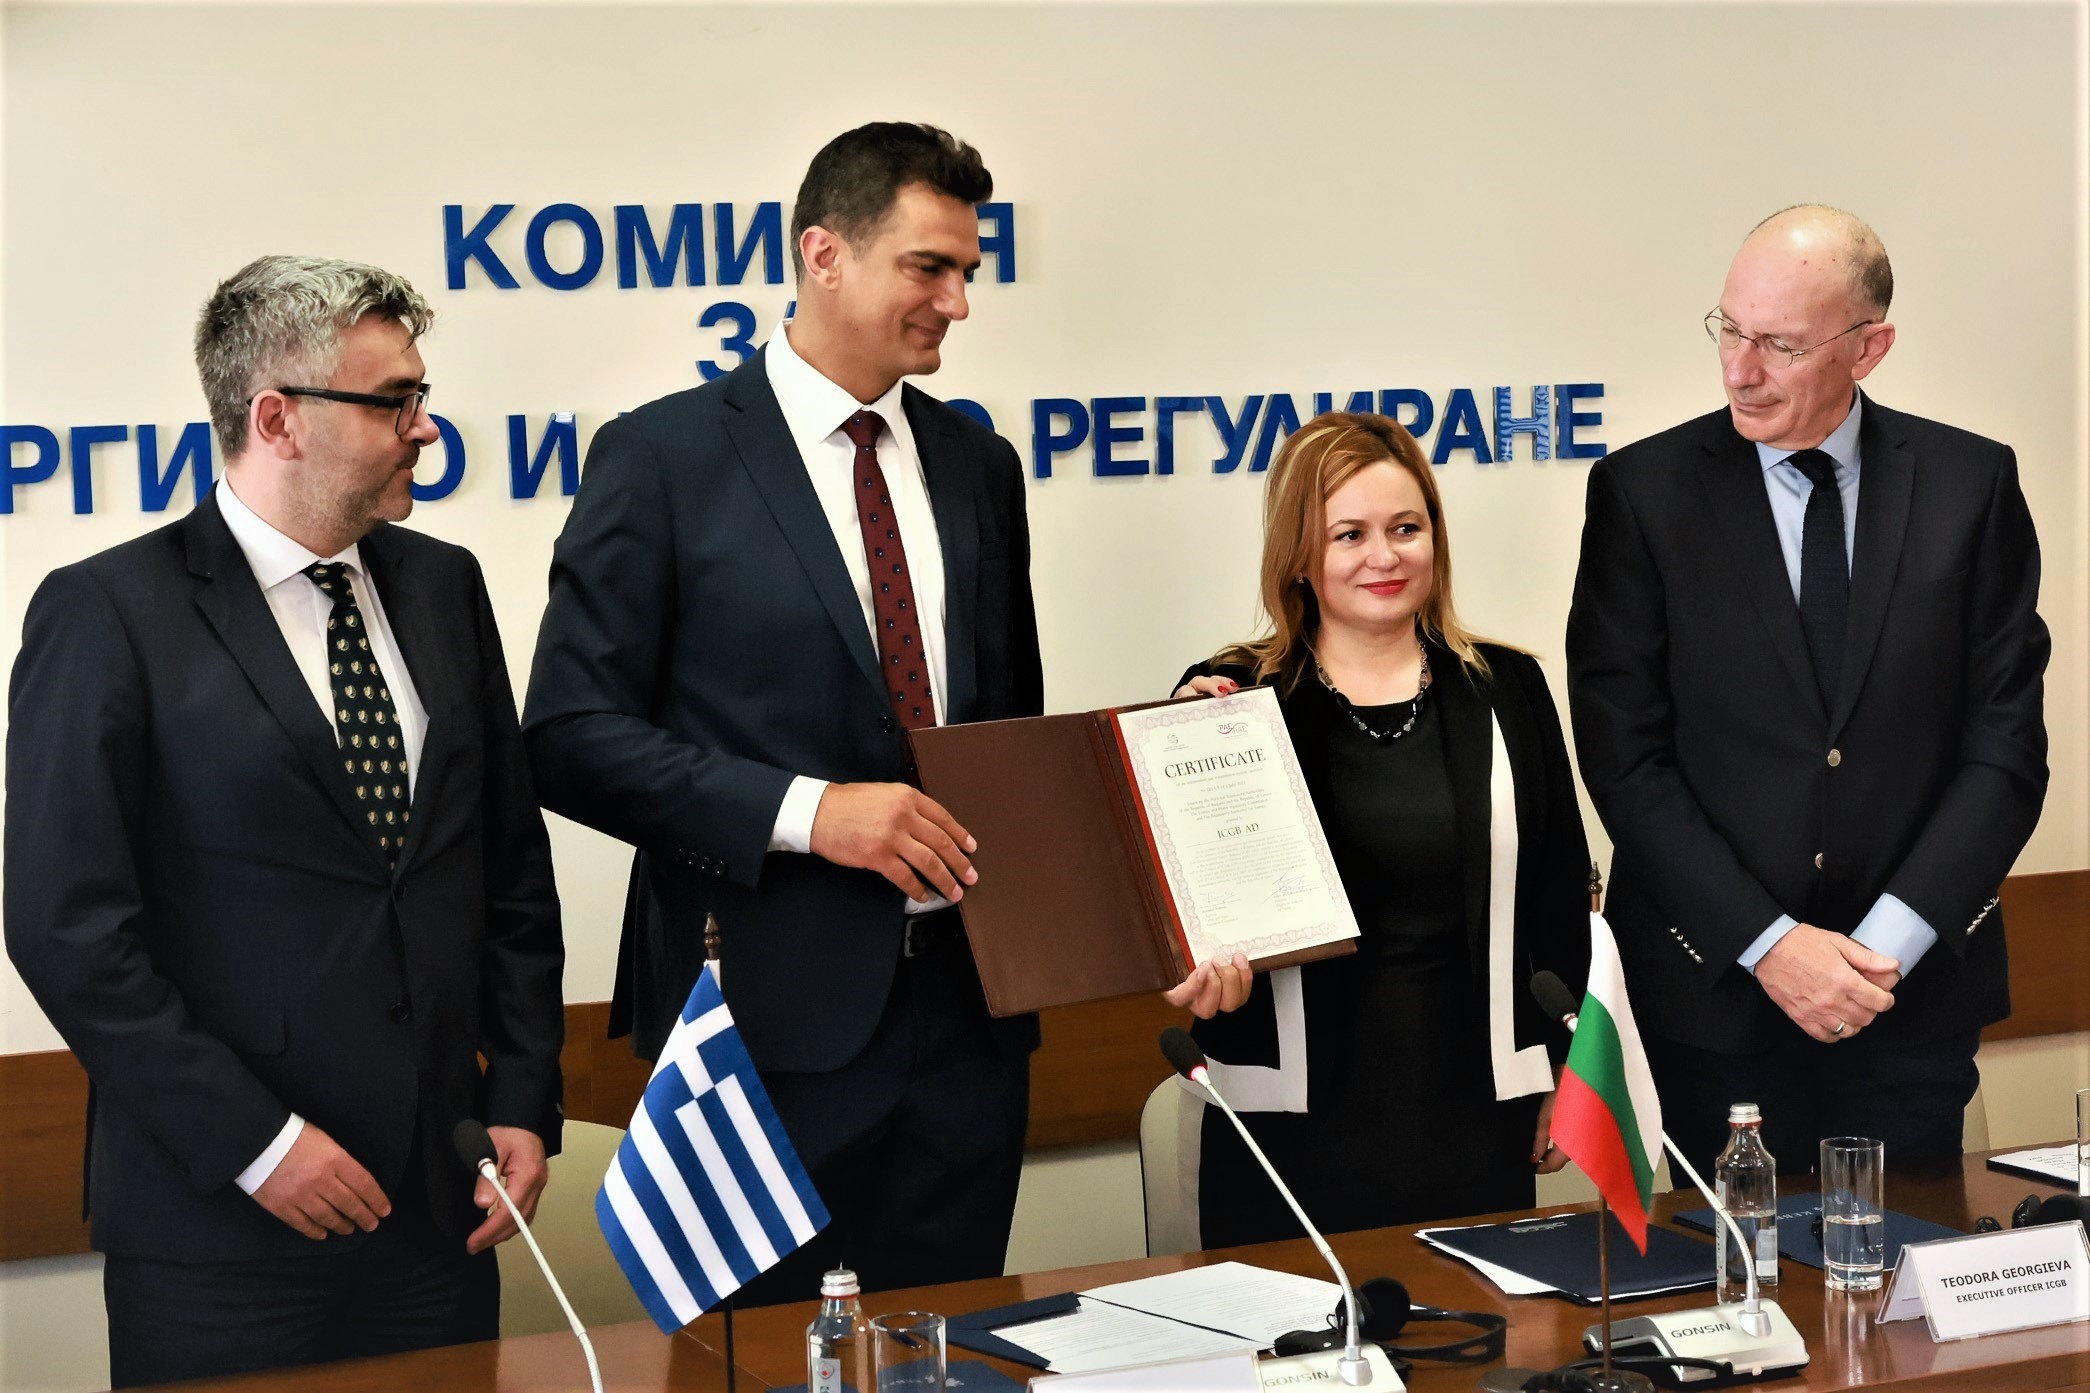 THE NATIONAL REGULATORY AUTHORITIES FOR ENERGY OF BULGARIA AND GREECE HANDED OVER THE FINAL JOINT DECISION ON THE CERTIFICATION OF ICGB AD AS AN INDEPENDENT TRANSMISSION OPERATOR